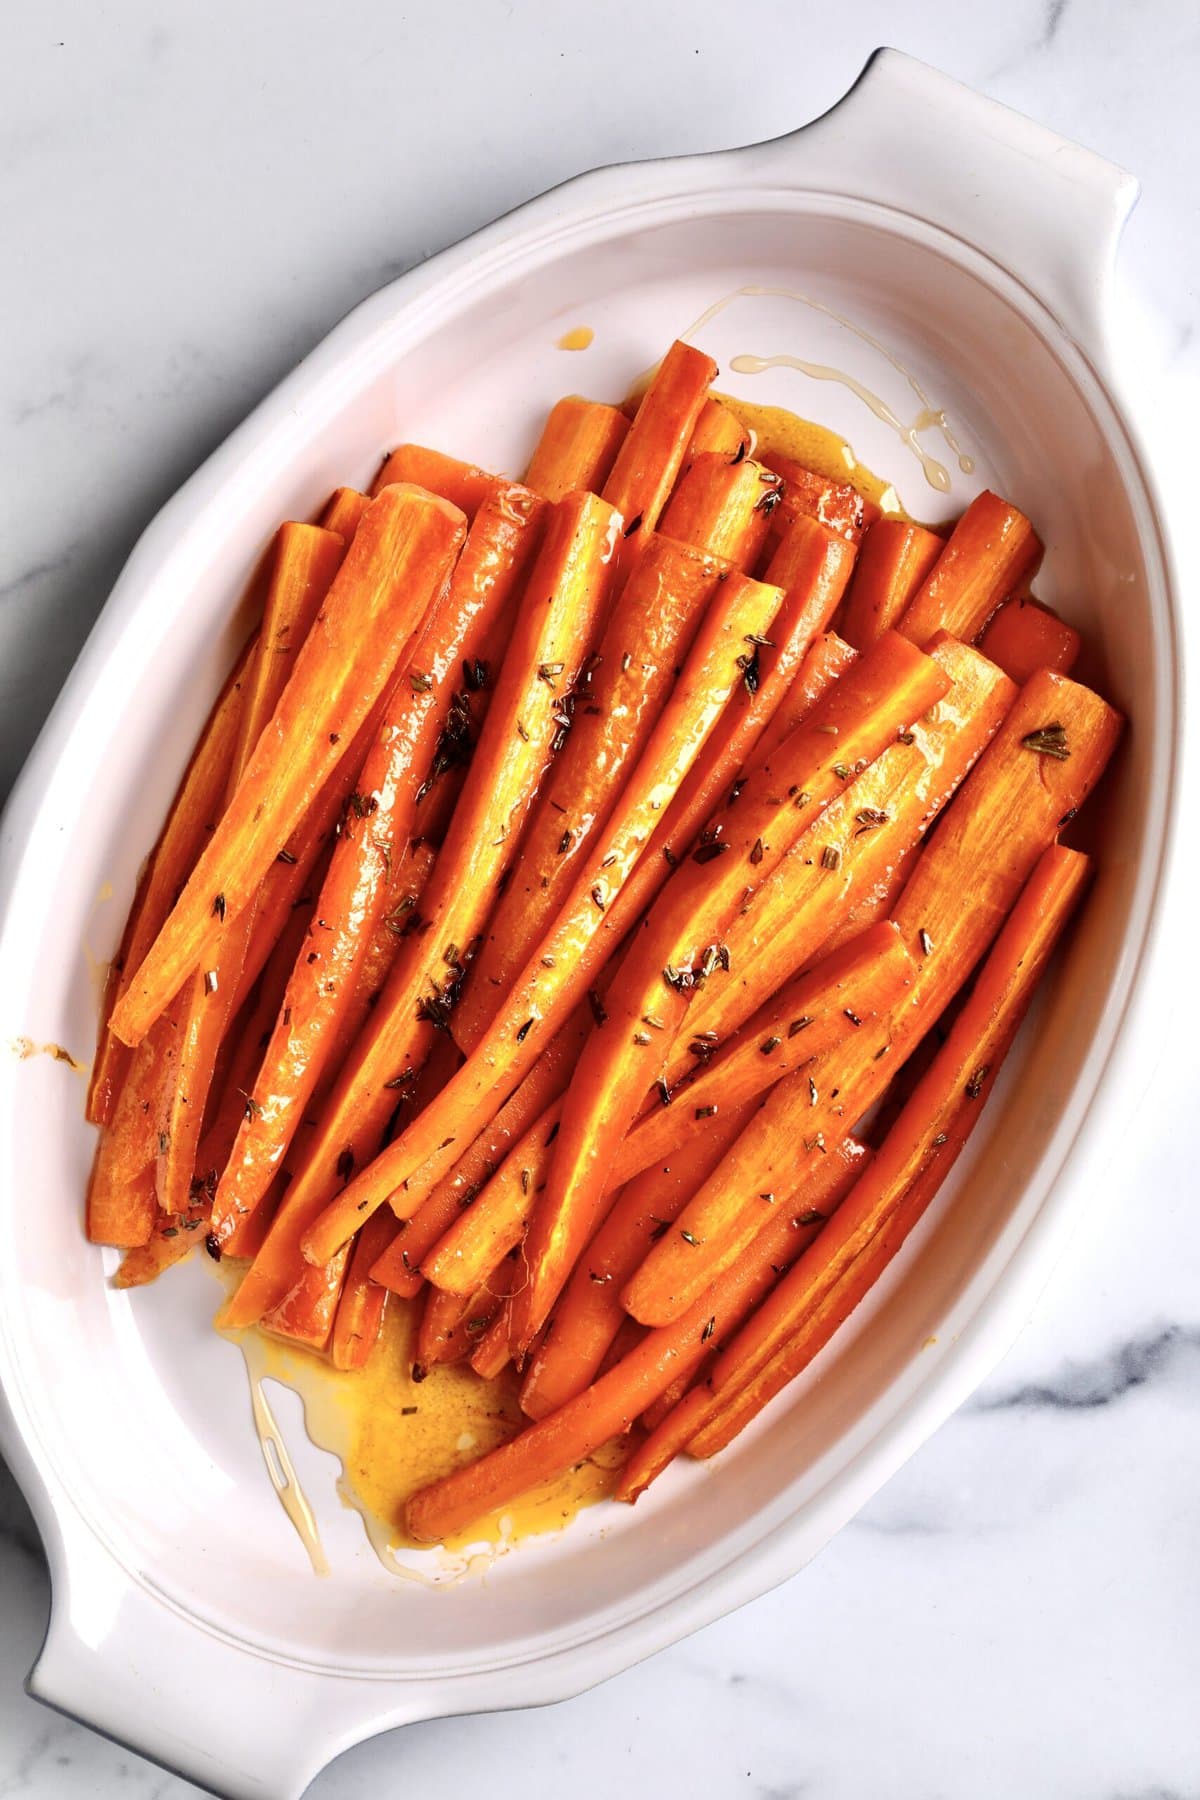 Best Honey Glazed Carrots Recipe (Oven Roasted) in a white serving plate. The carrots are roasted and ready to serve. 